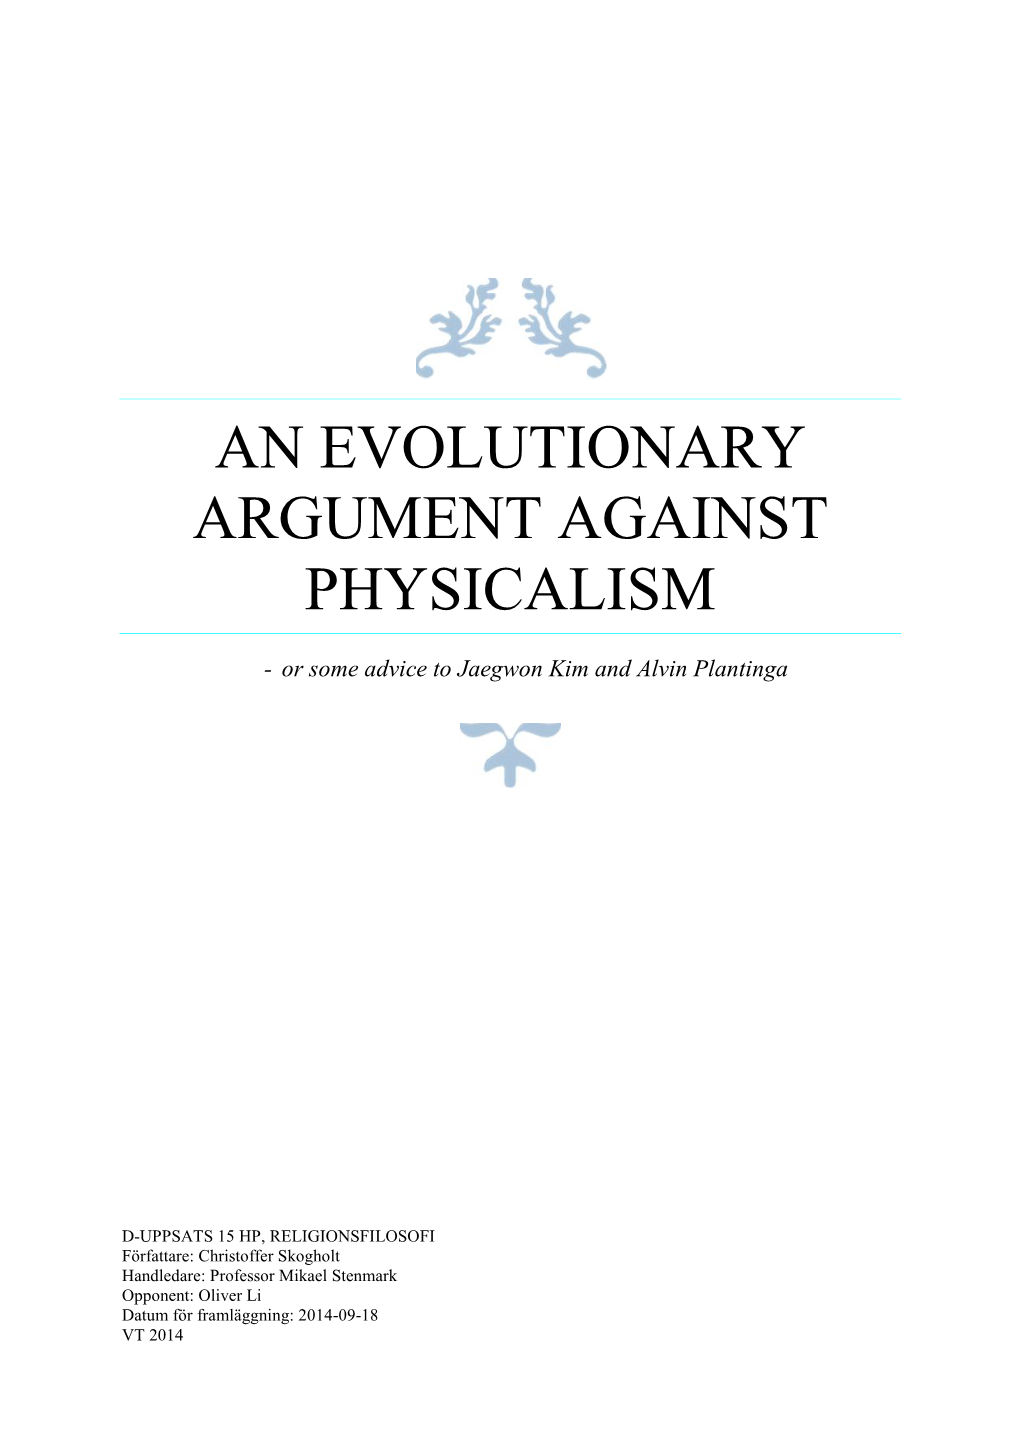 An Evolutionary Argument Against Physicalism